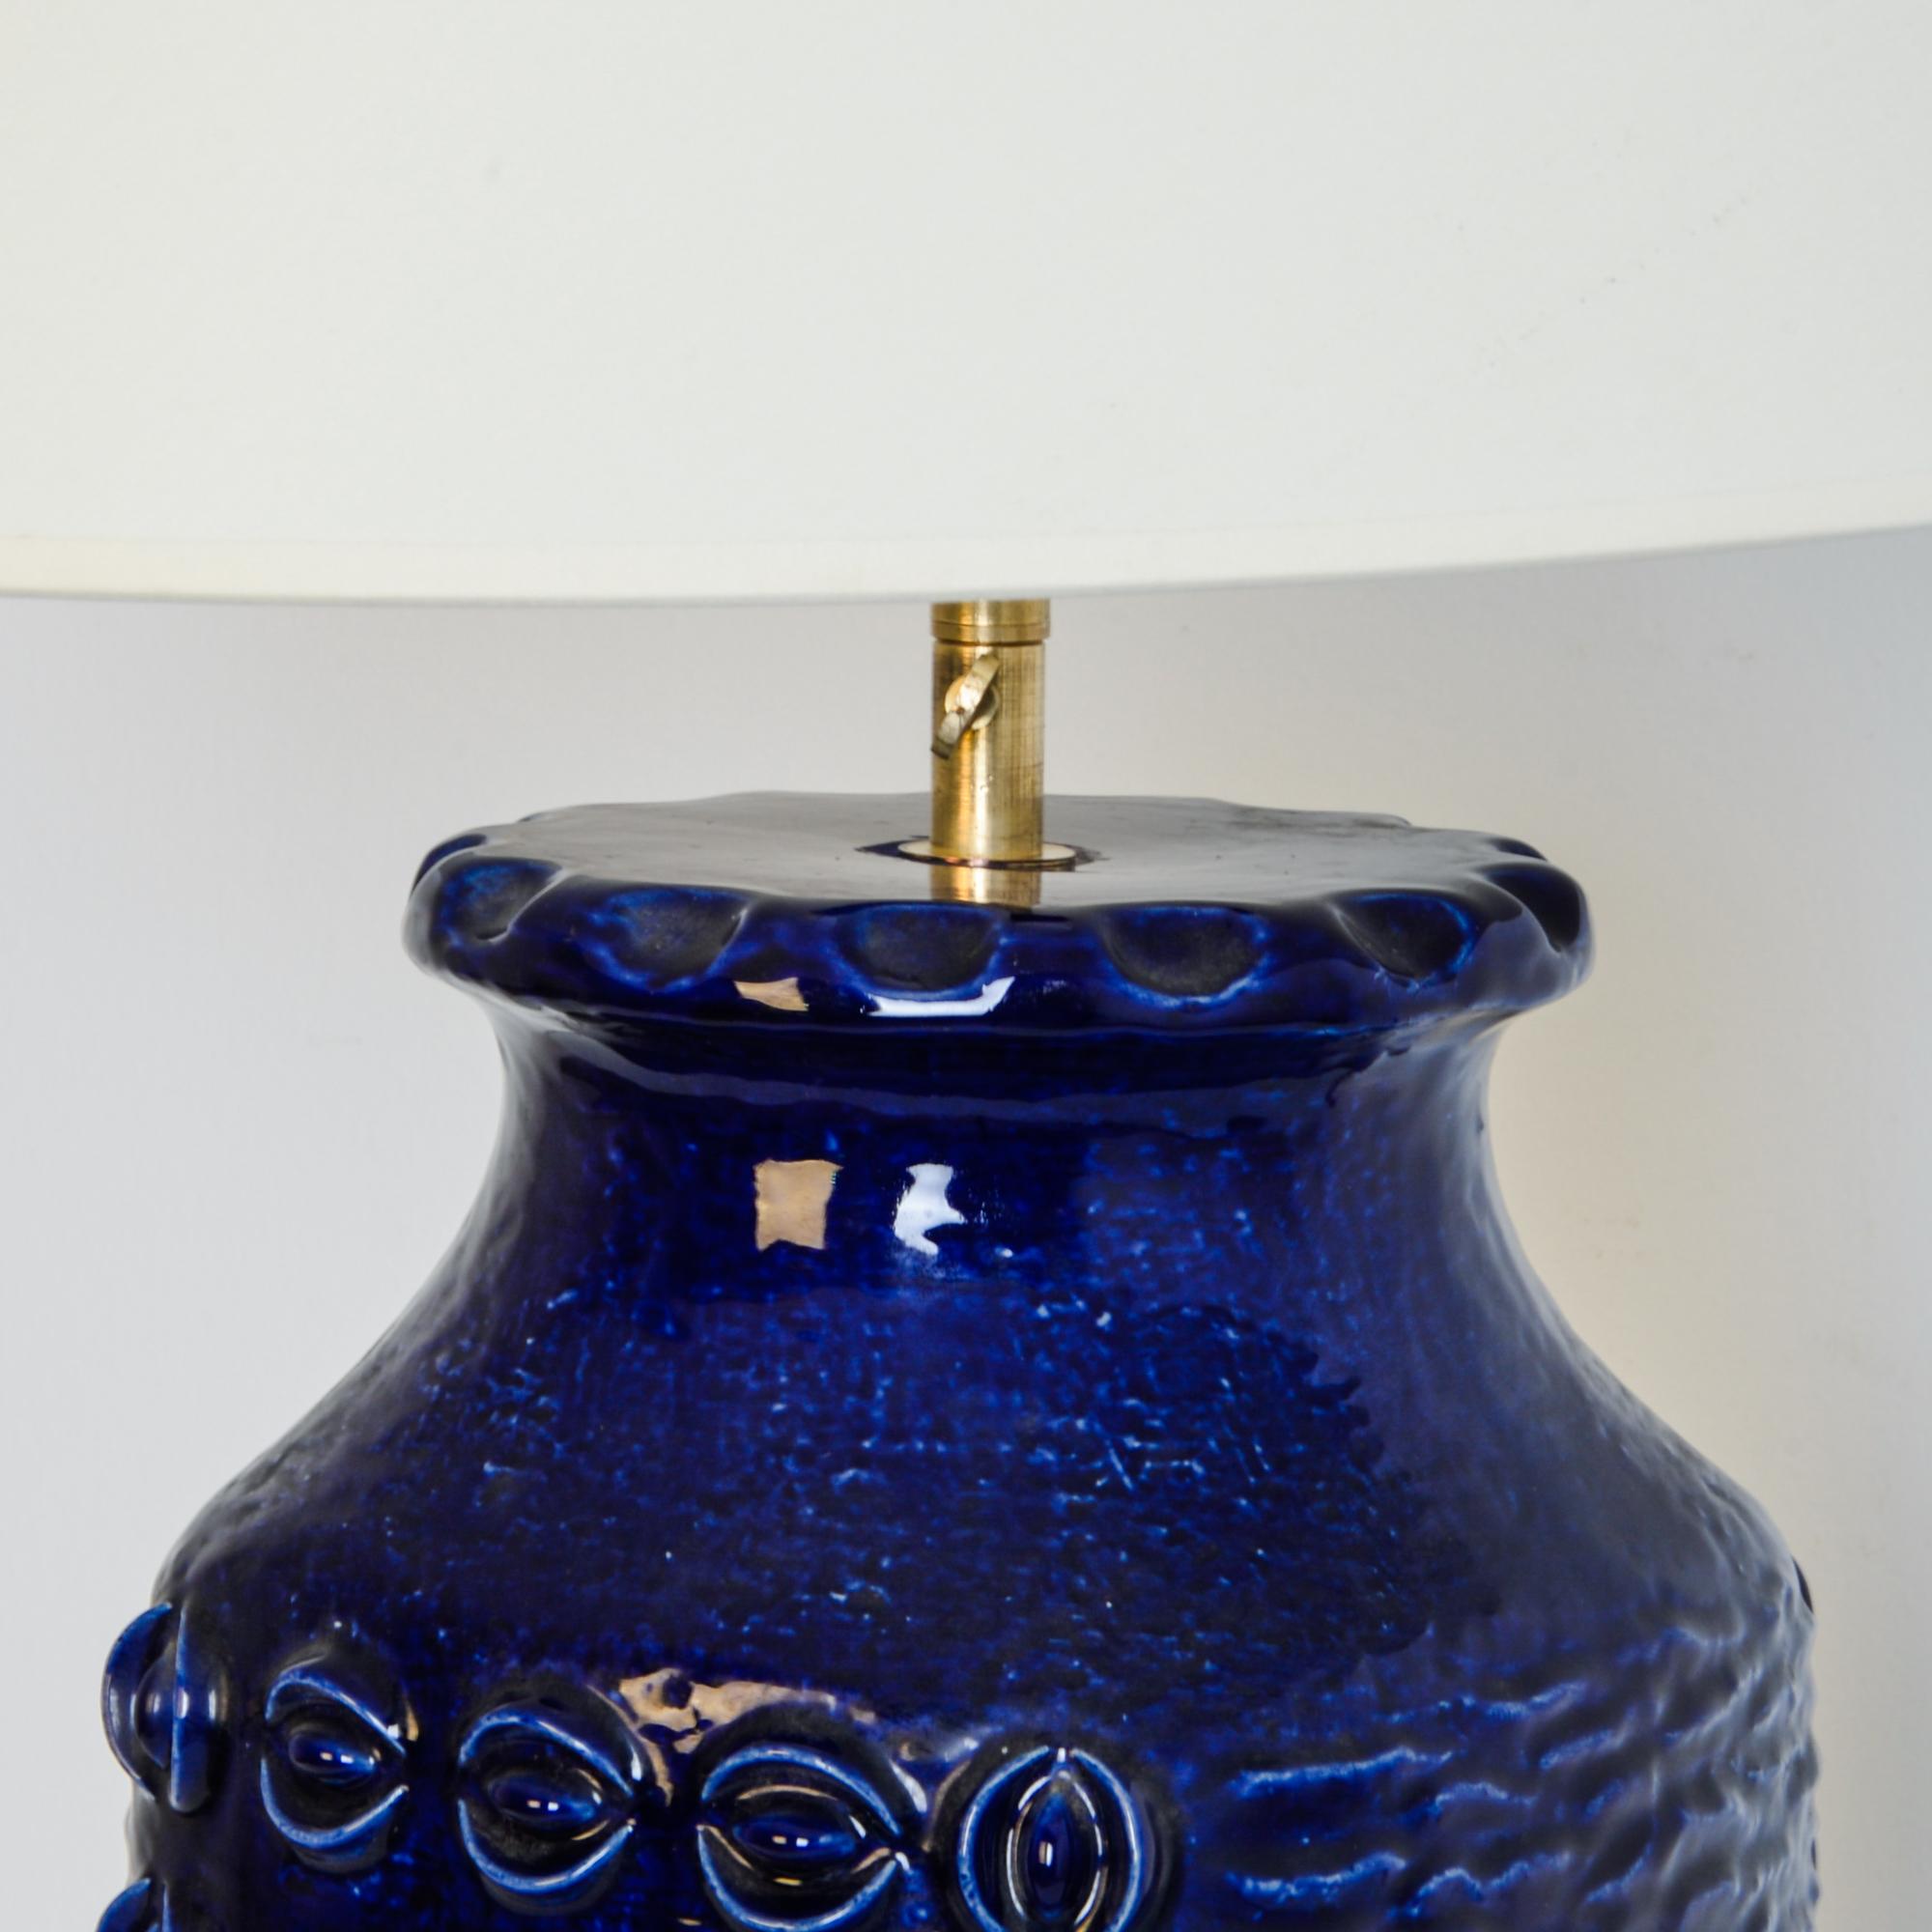 A patterned dark blue vase has been fitted with modern brass adjustable fixture and E26 lighting socket. These brilliant midcentury ceramic vases were produced primarily in the 1970s, marked with 